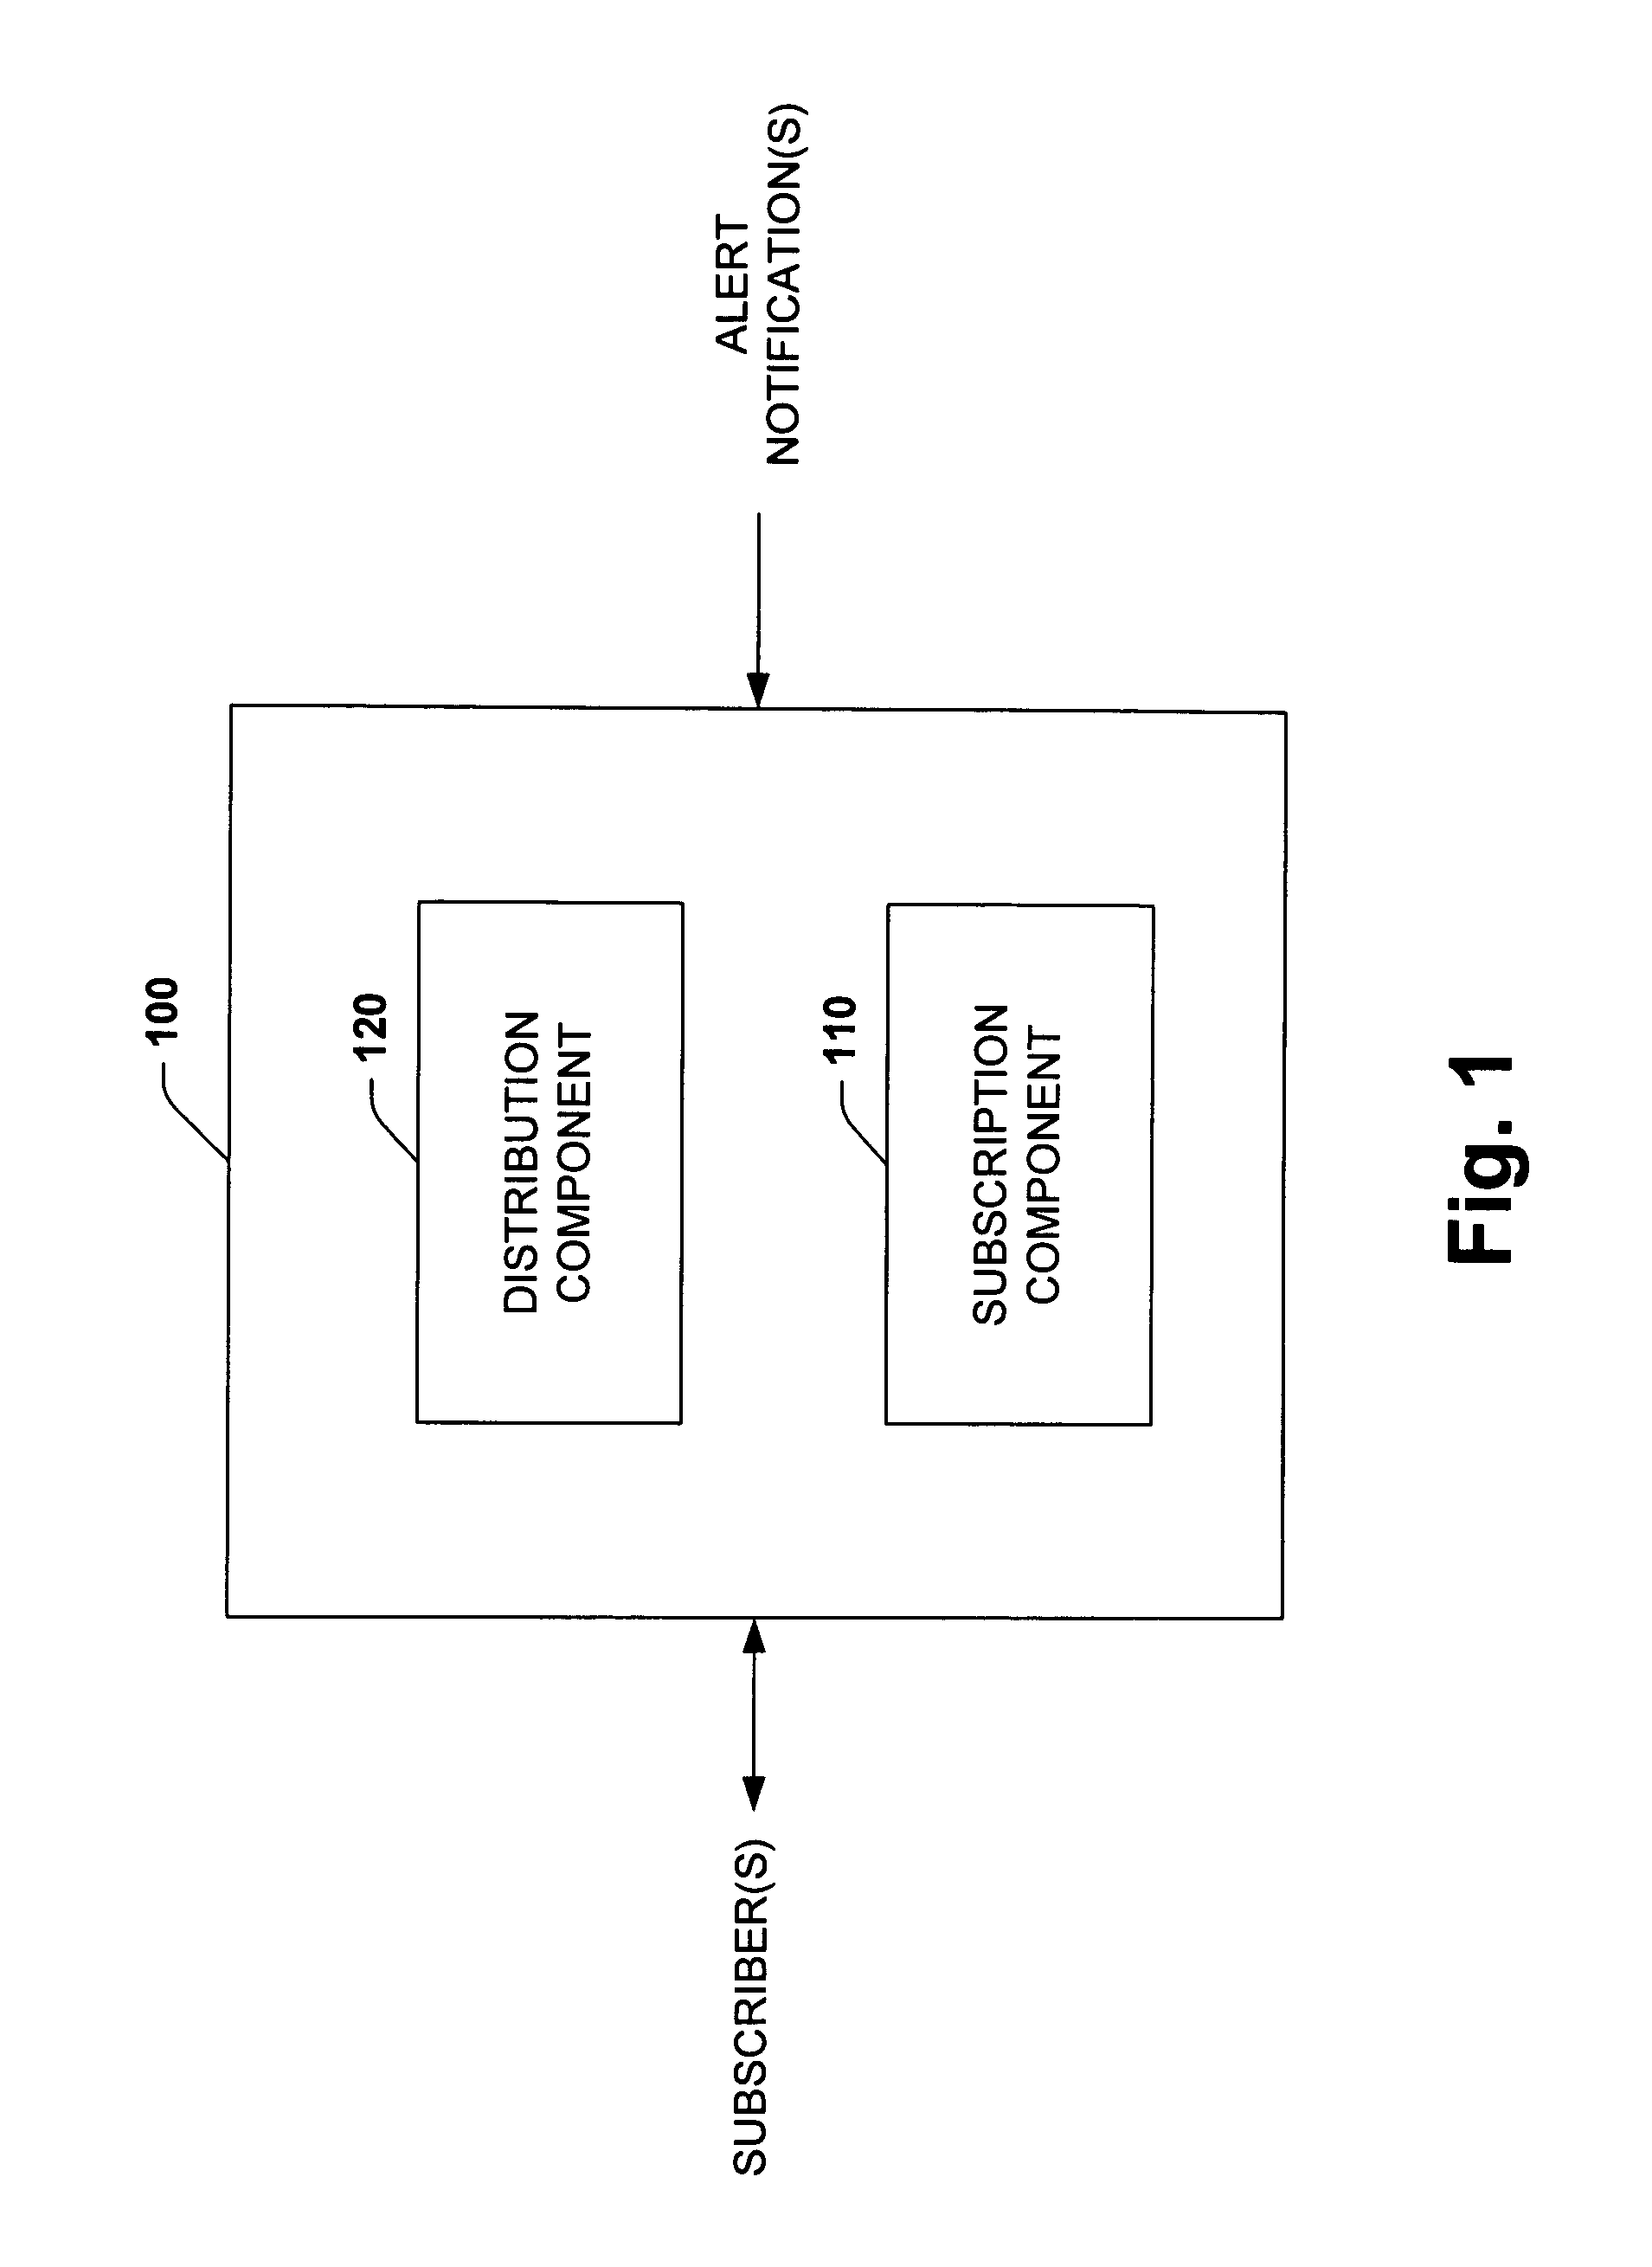 Systems and methods for notifying multiple hosts from an industrial controller